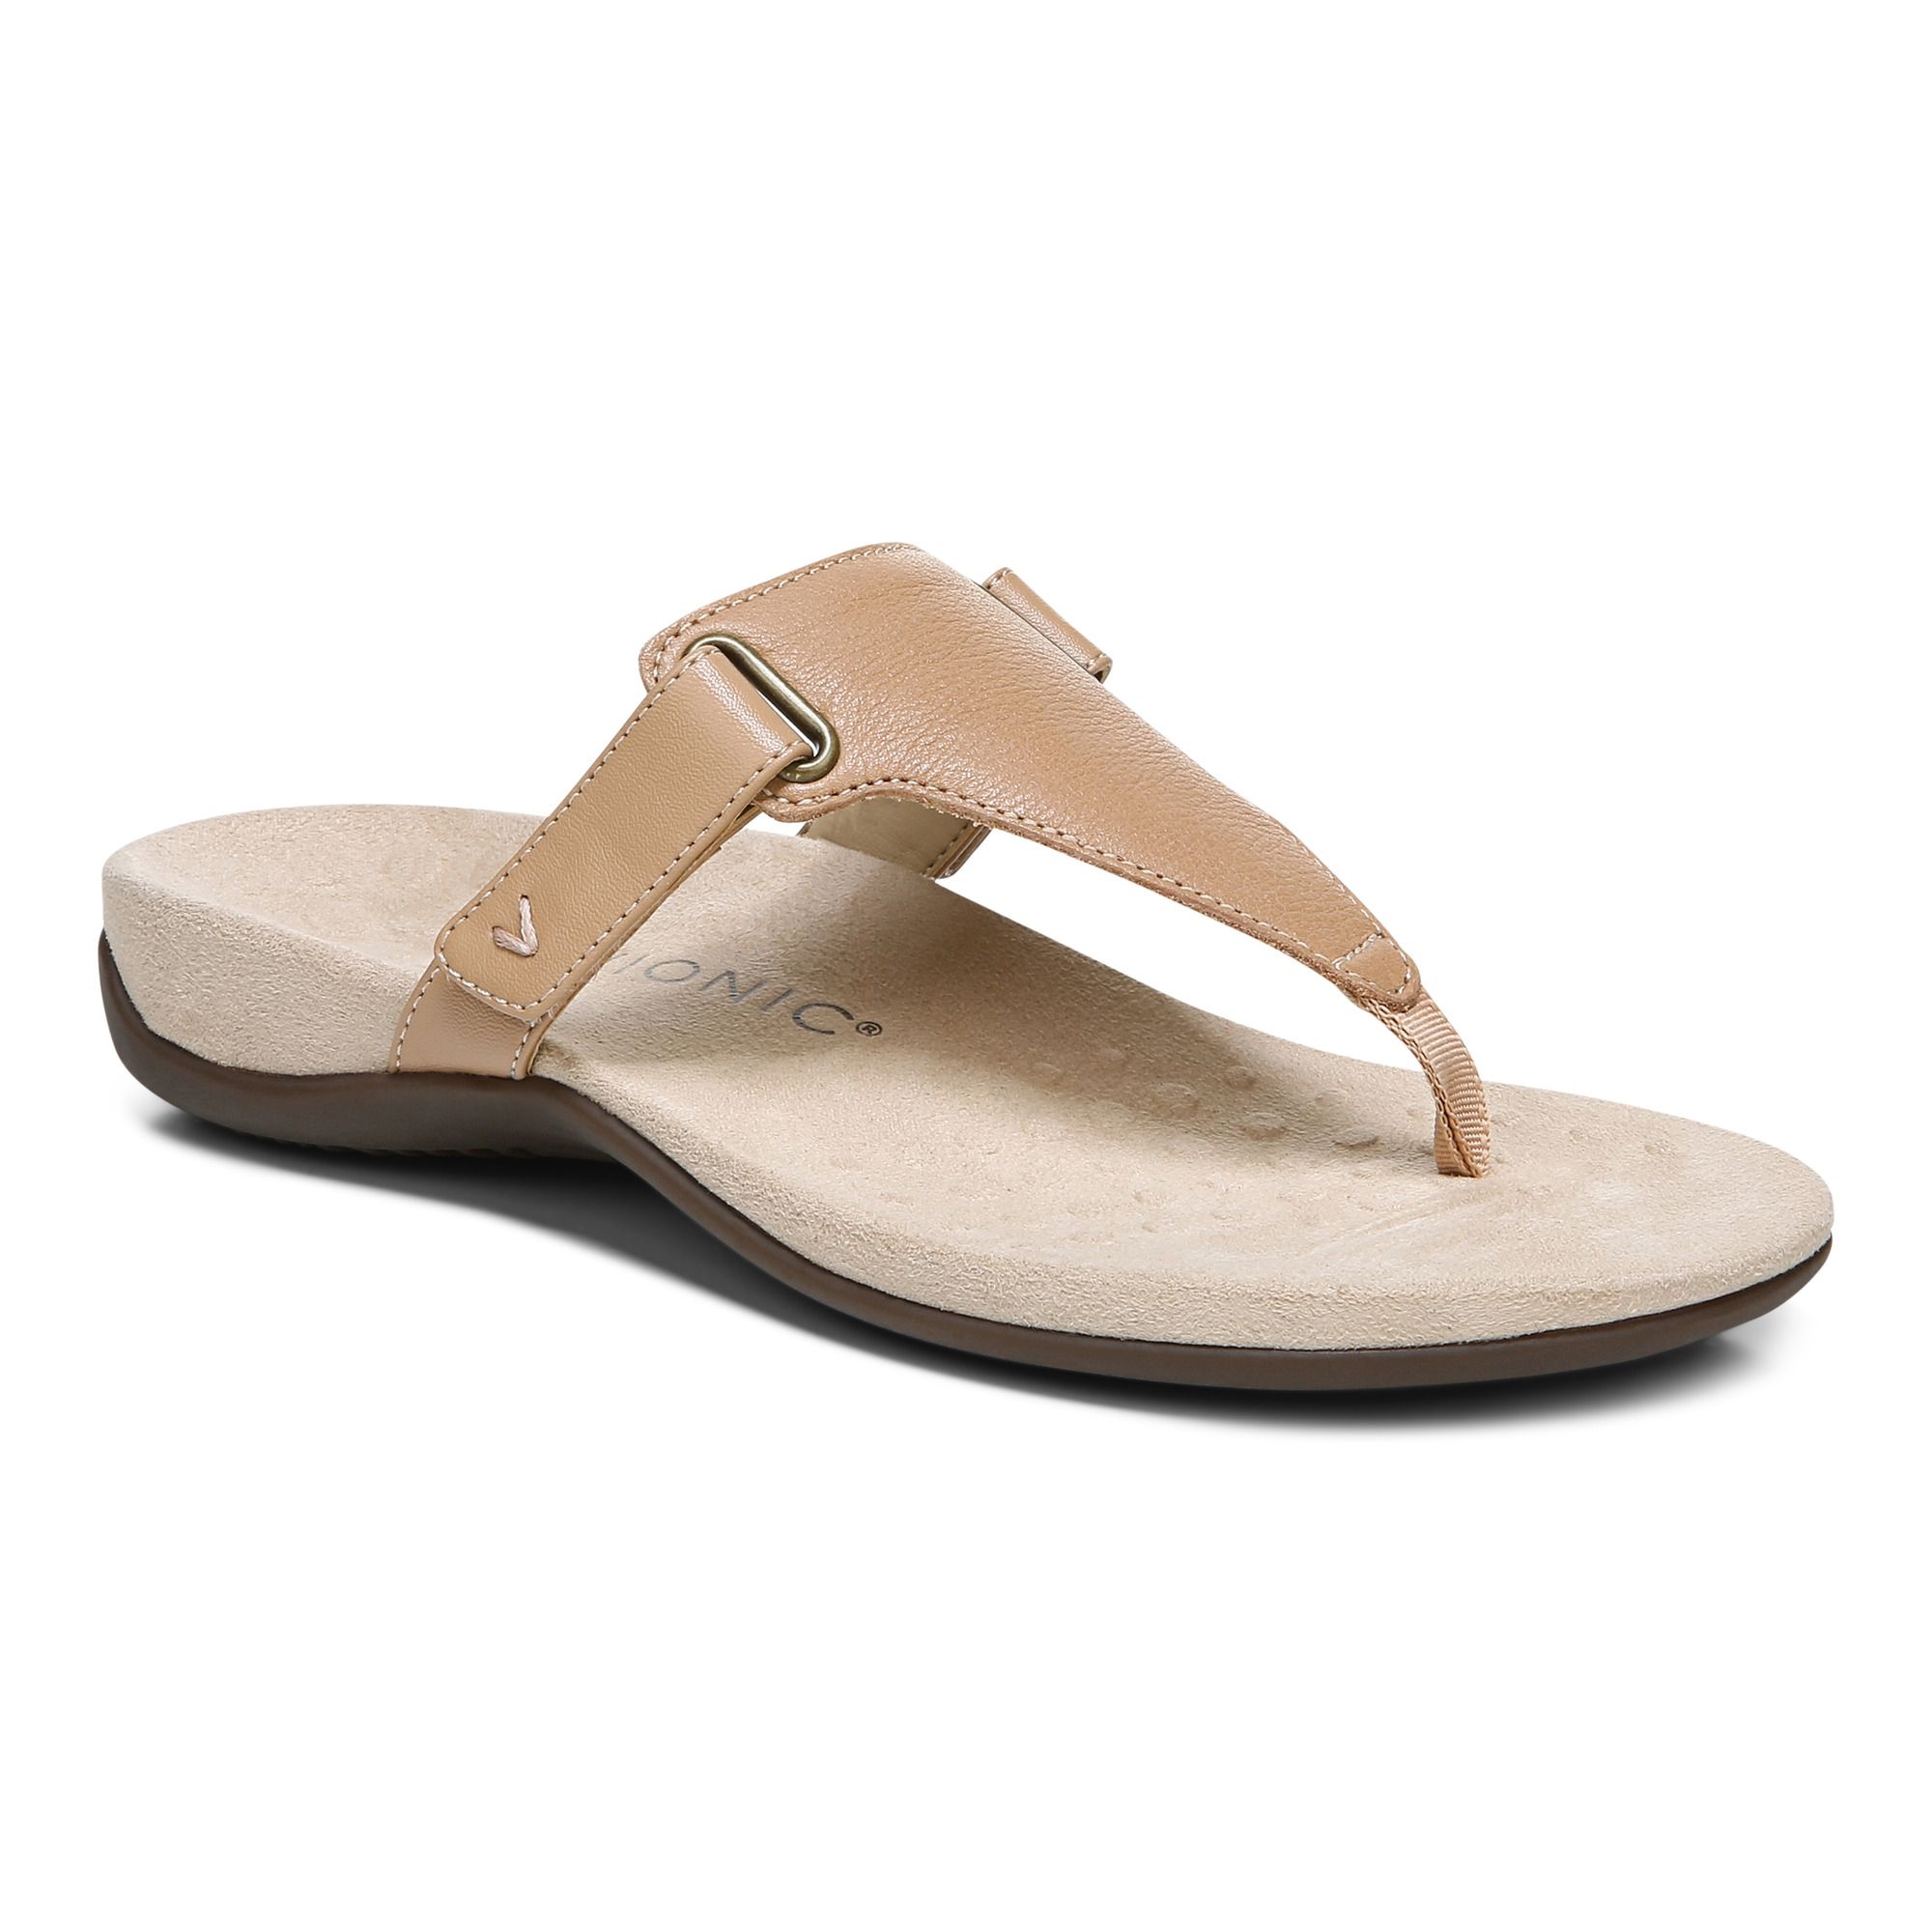 Vionic Women's Rest Wanda Toe Post Sandal Ladies Sandals that include Three-Zone Comfort with Orthotic Insole Arch Support 